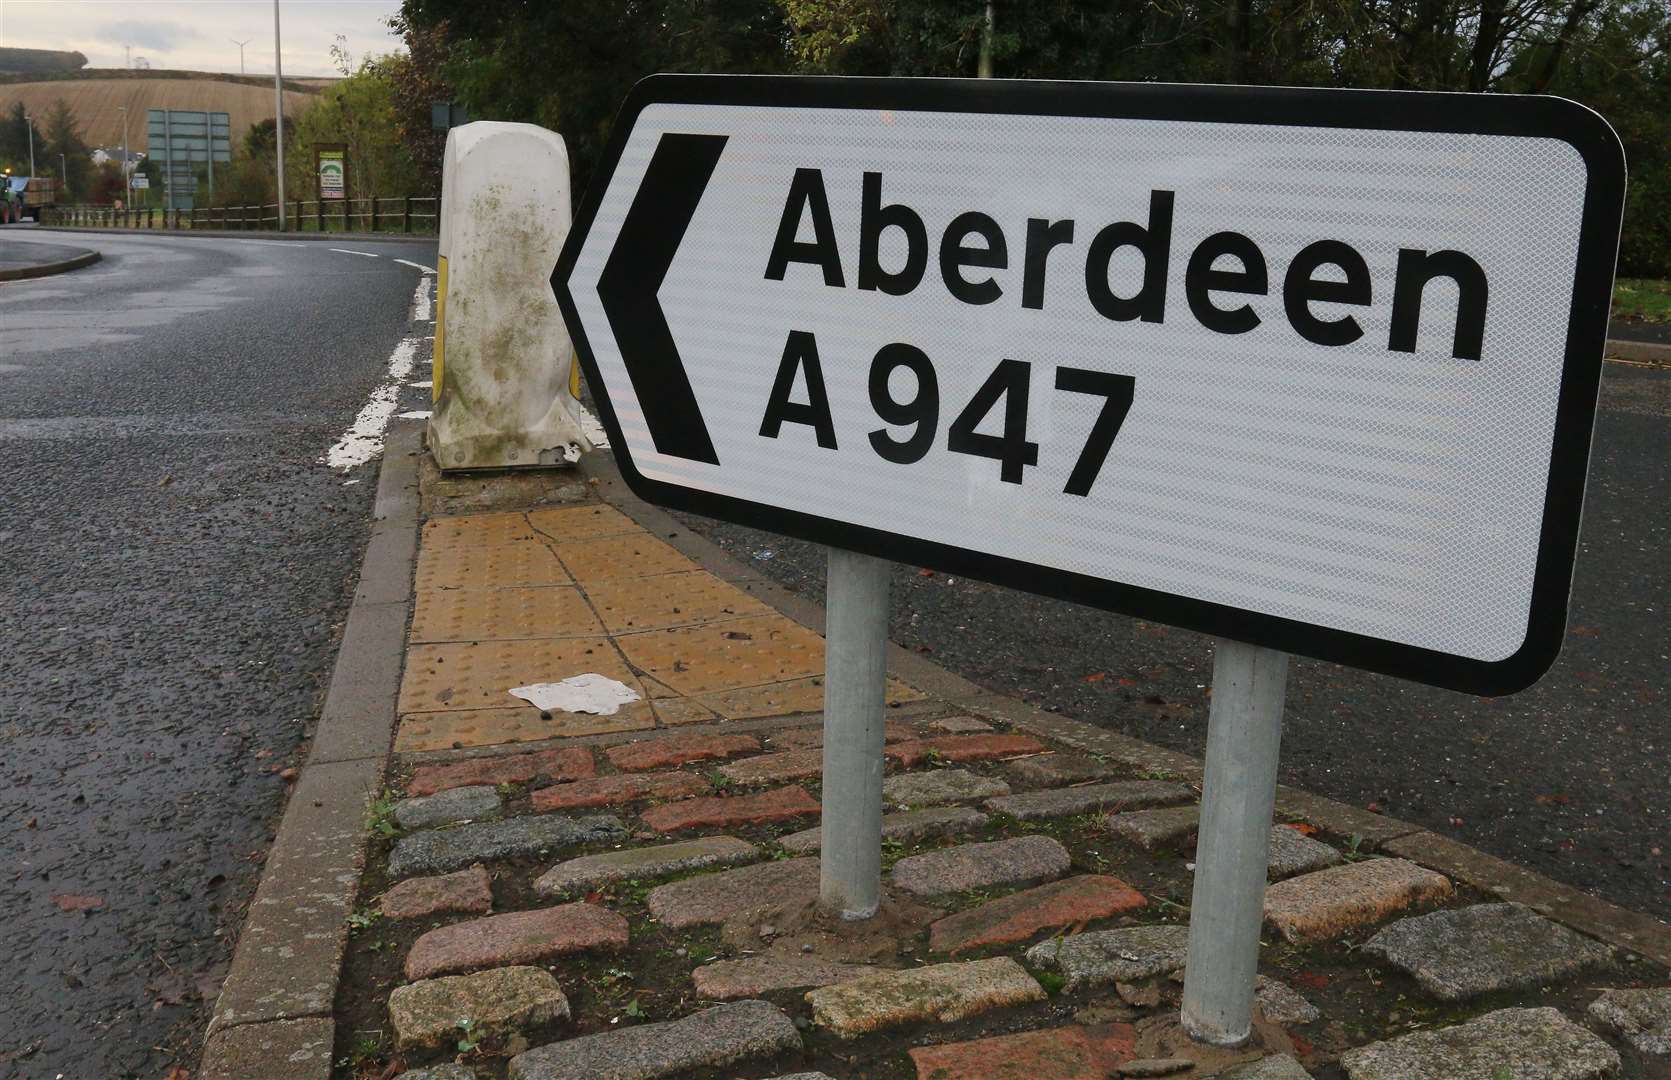 Councillors will discuss actions planned to improve road safety on the A947 at an upcoming meeting.